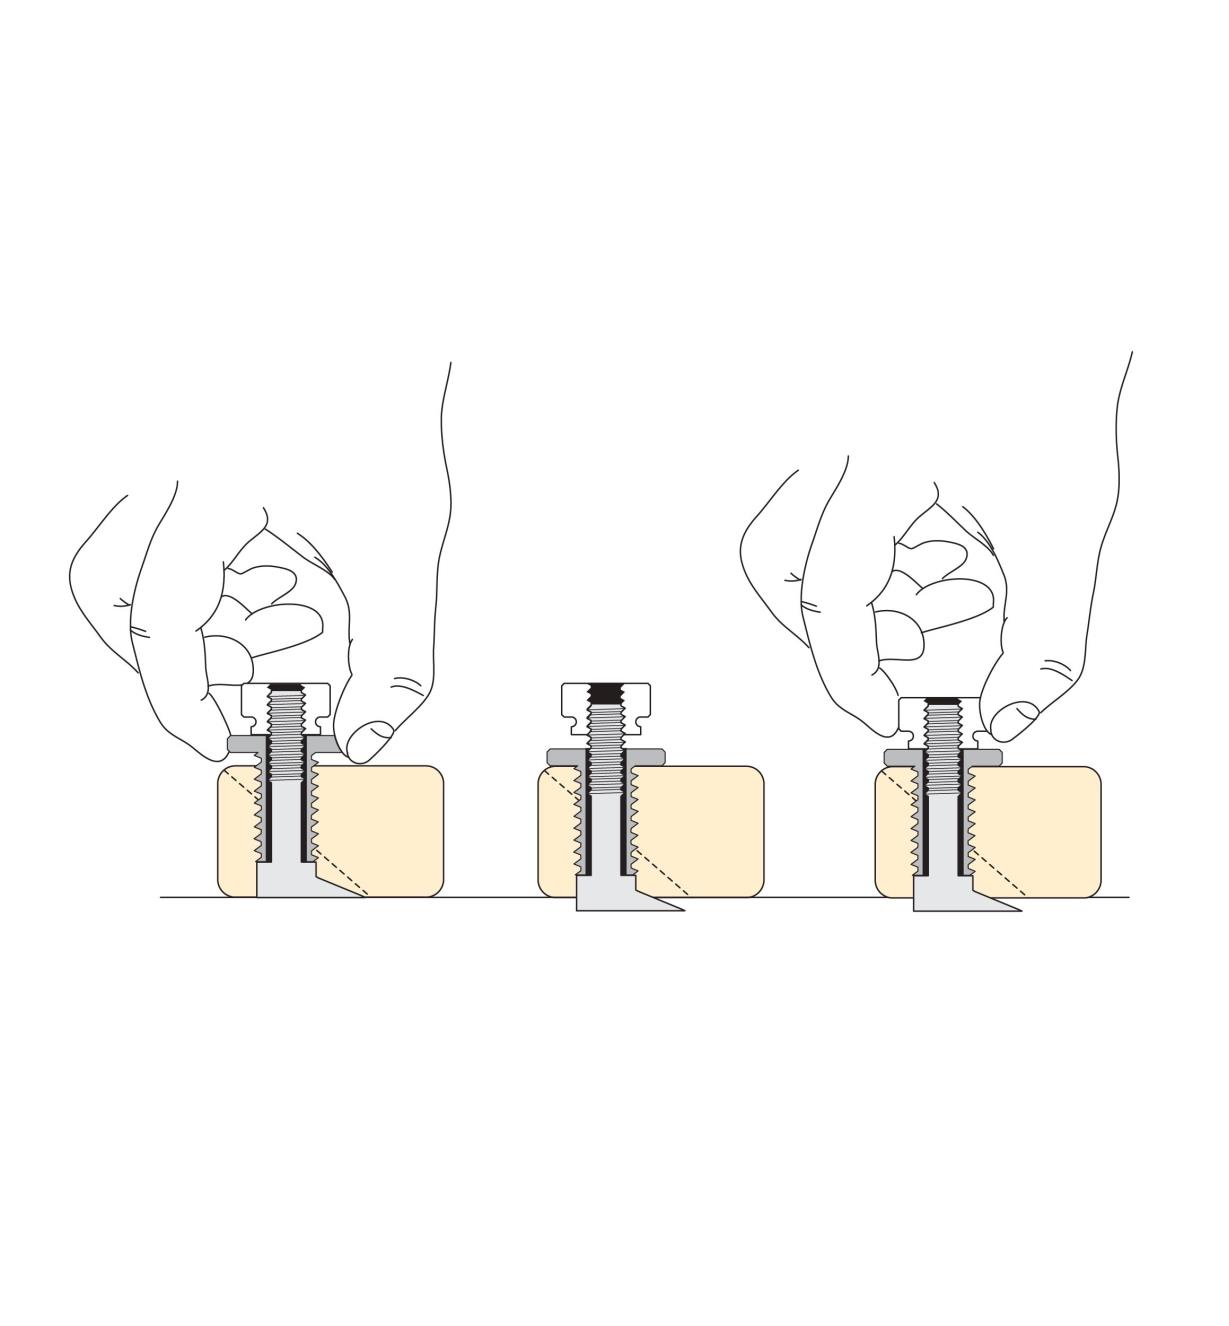 Illustrations show how to adjust the blade for depth of cut